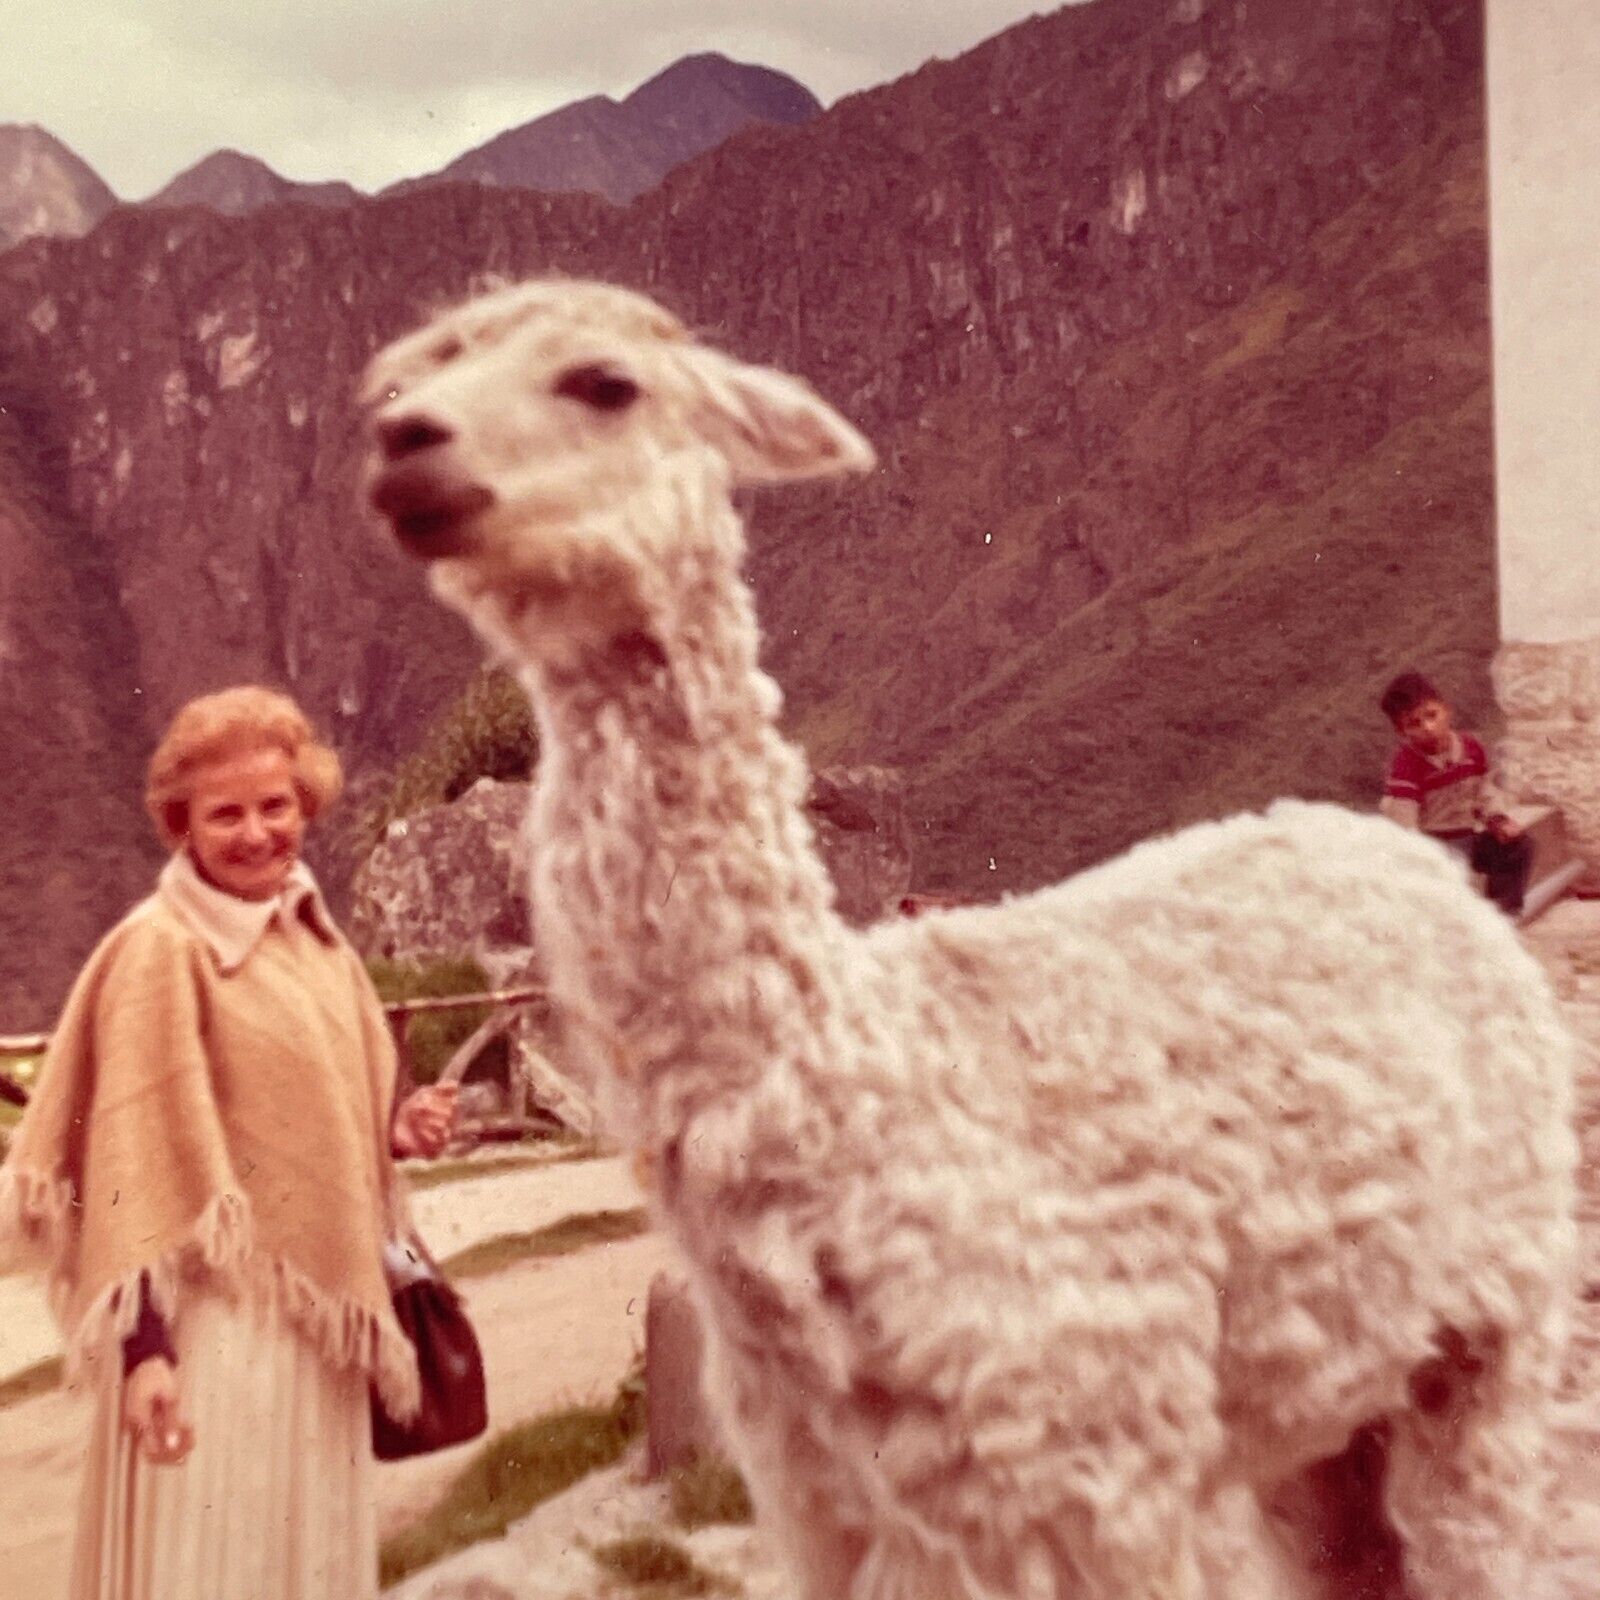 K6 Photograph 1964 Peru Llama Cute White Old Woman Hand From Out Of Frame Reach